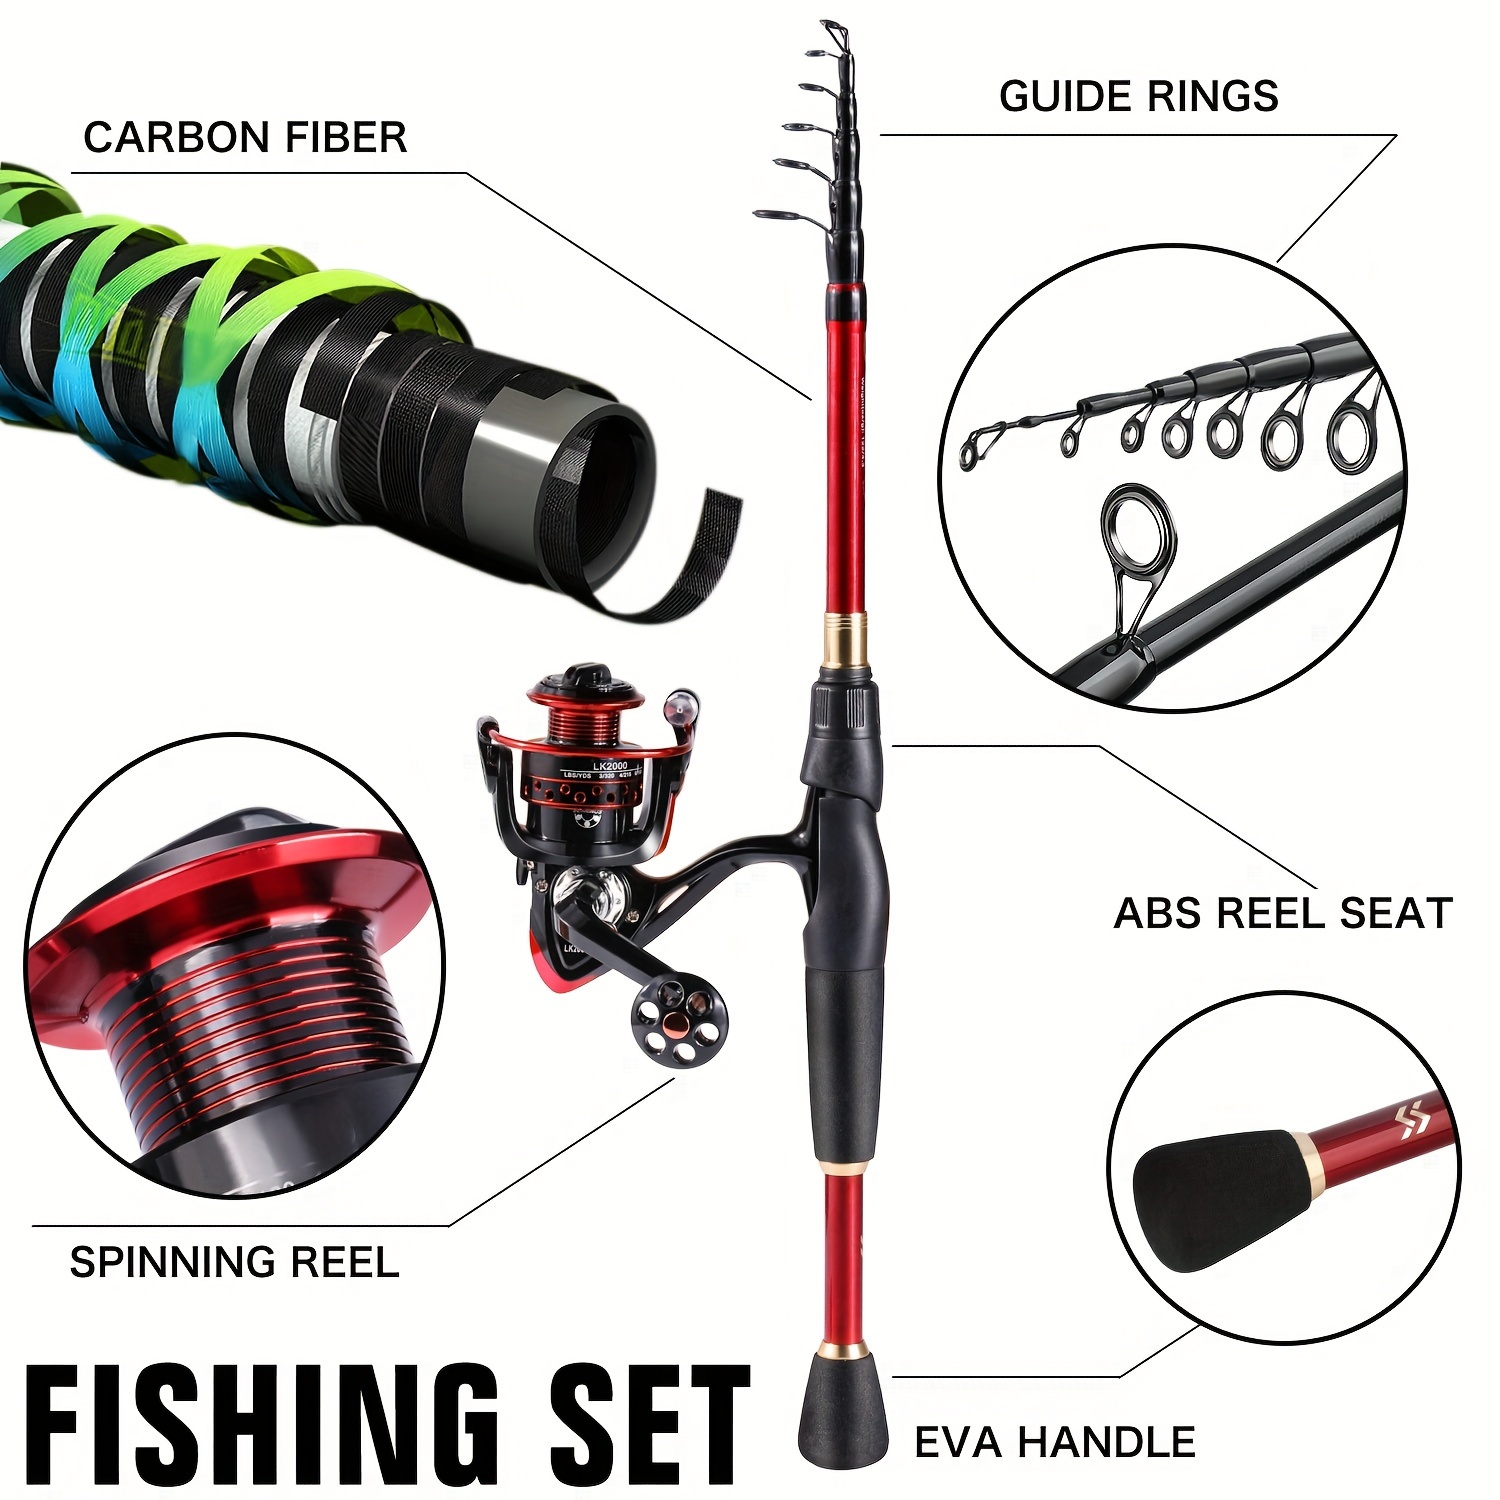 Straight Rod & Reel Combos